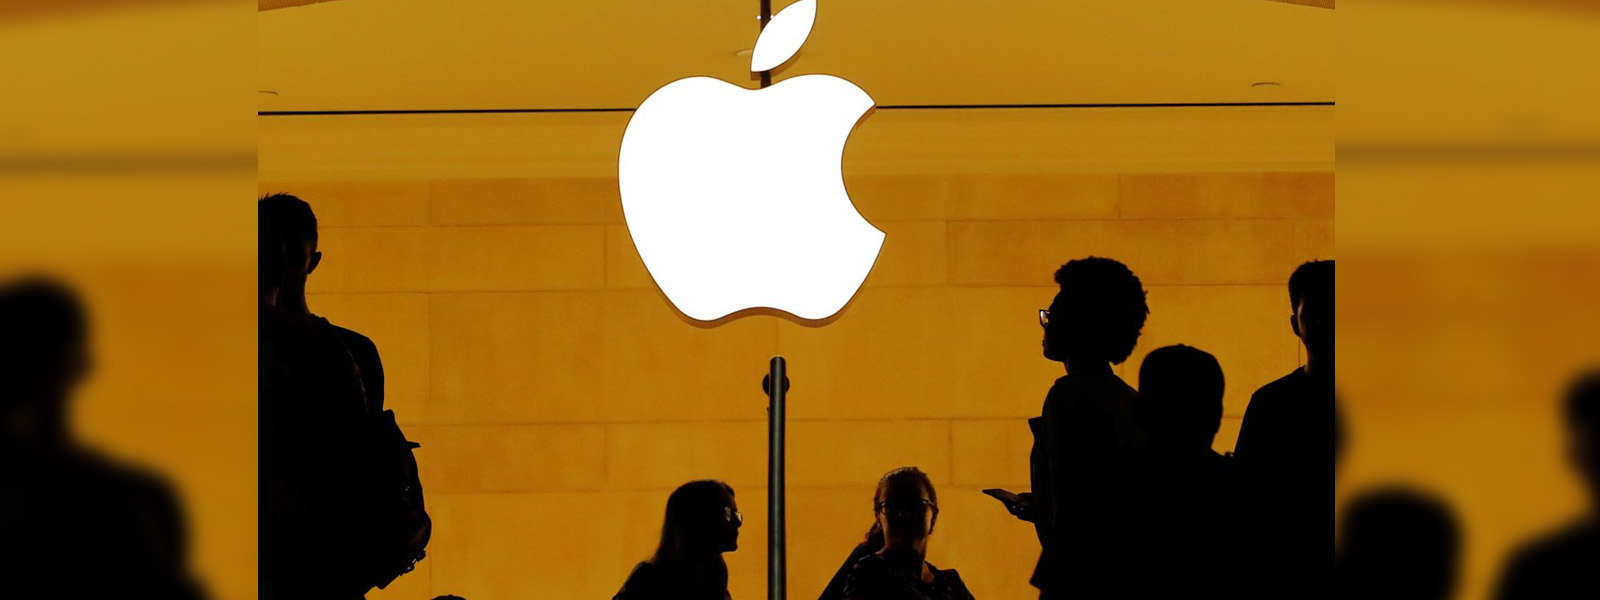 Apple is now the world's first $1 Trillion company